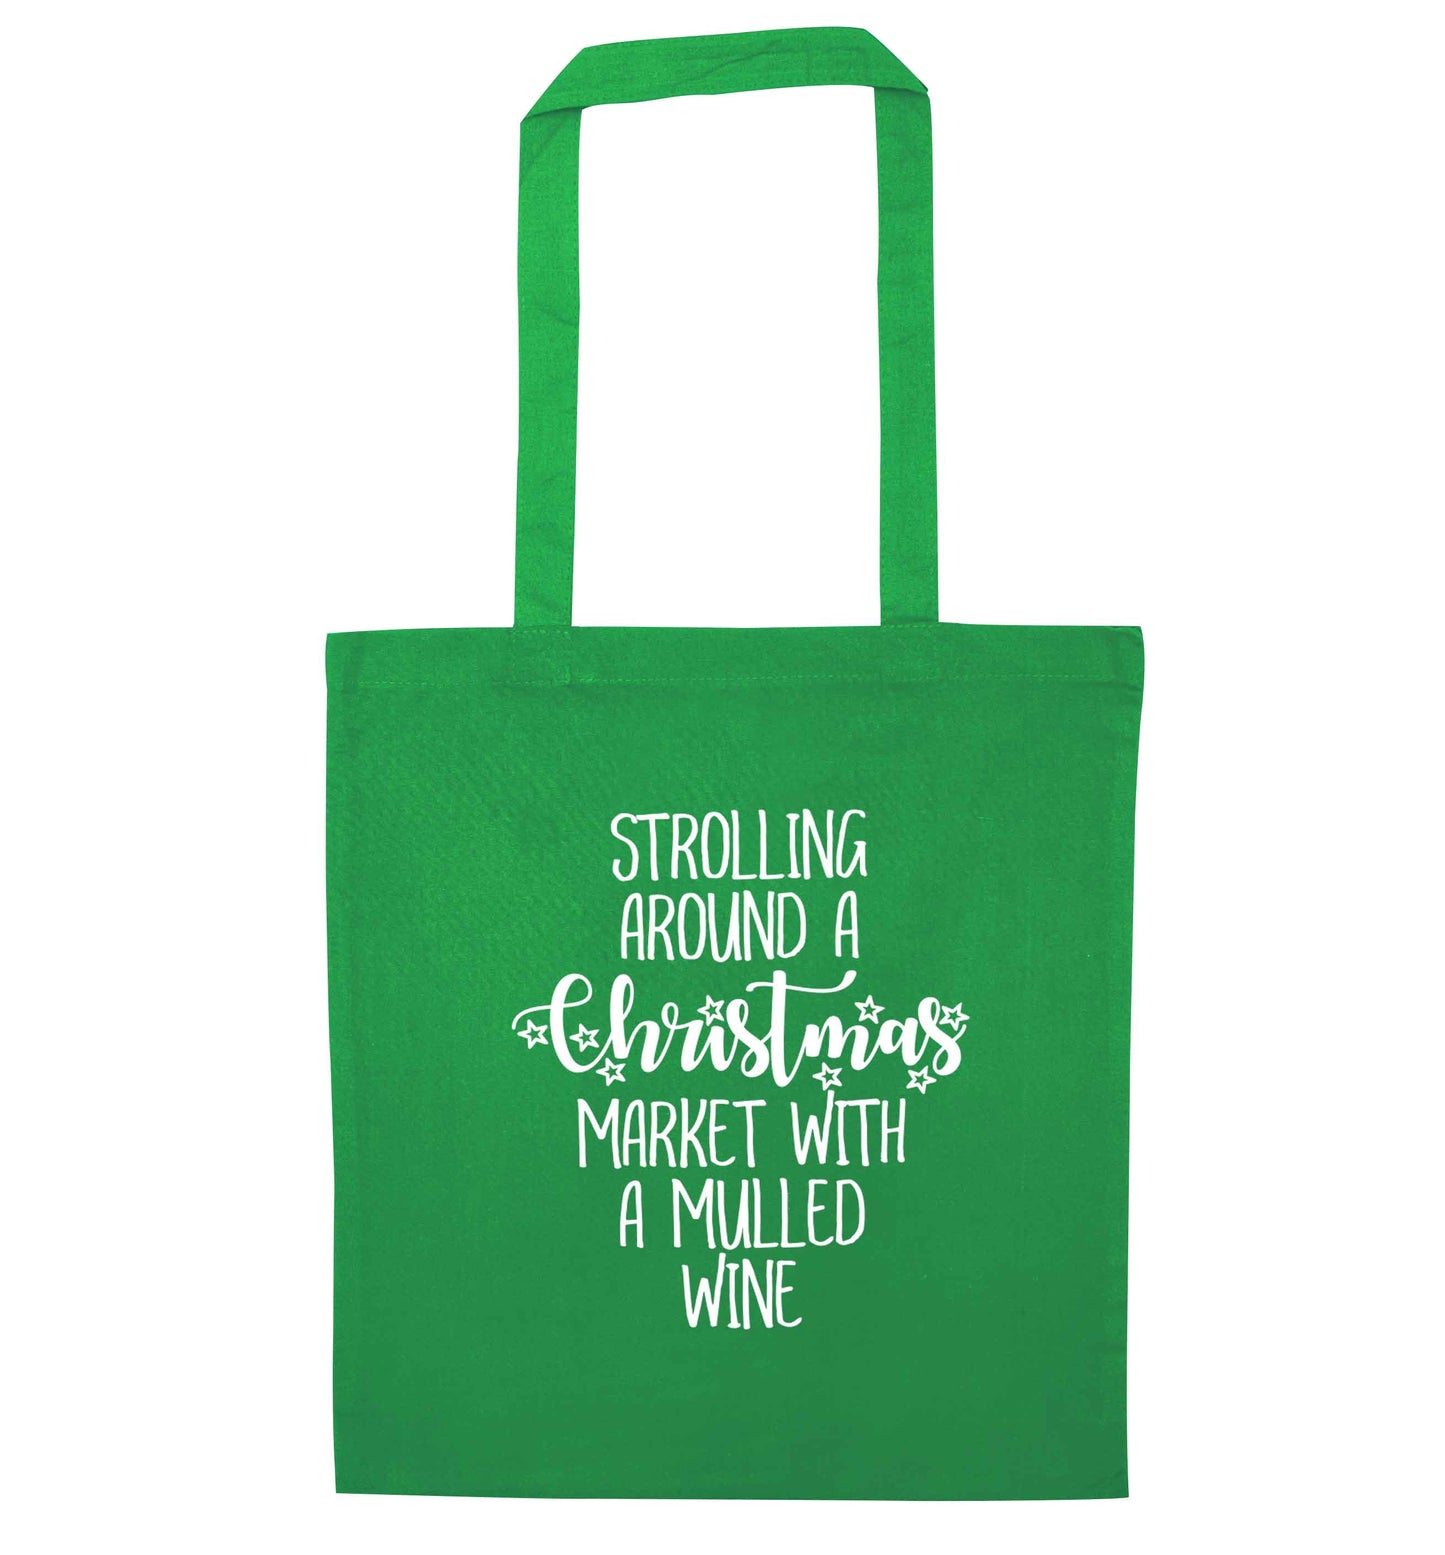 Strolling around a Christmas market with mulled wine green tote bag